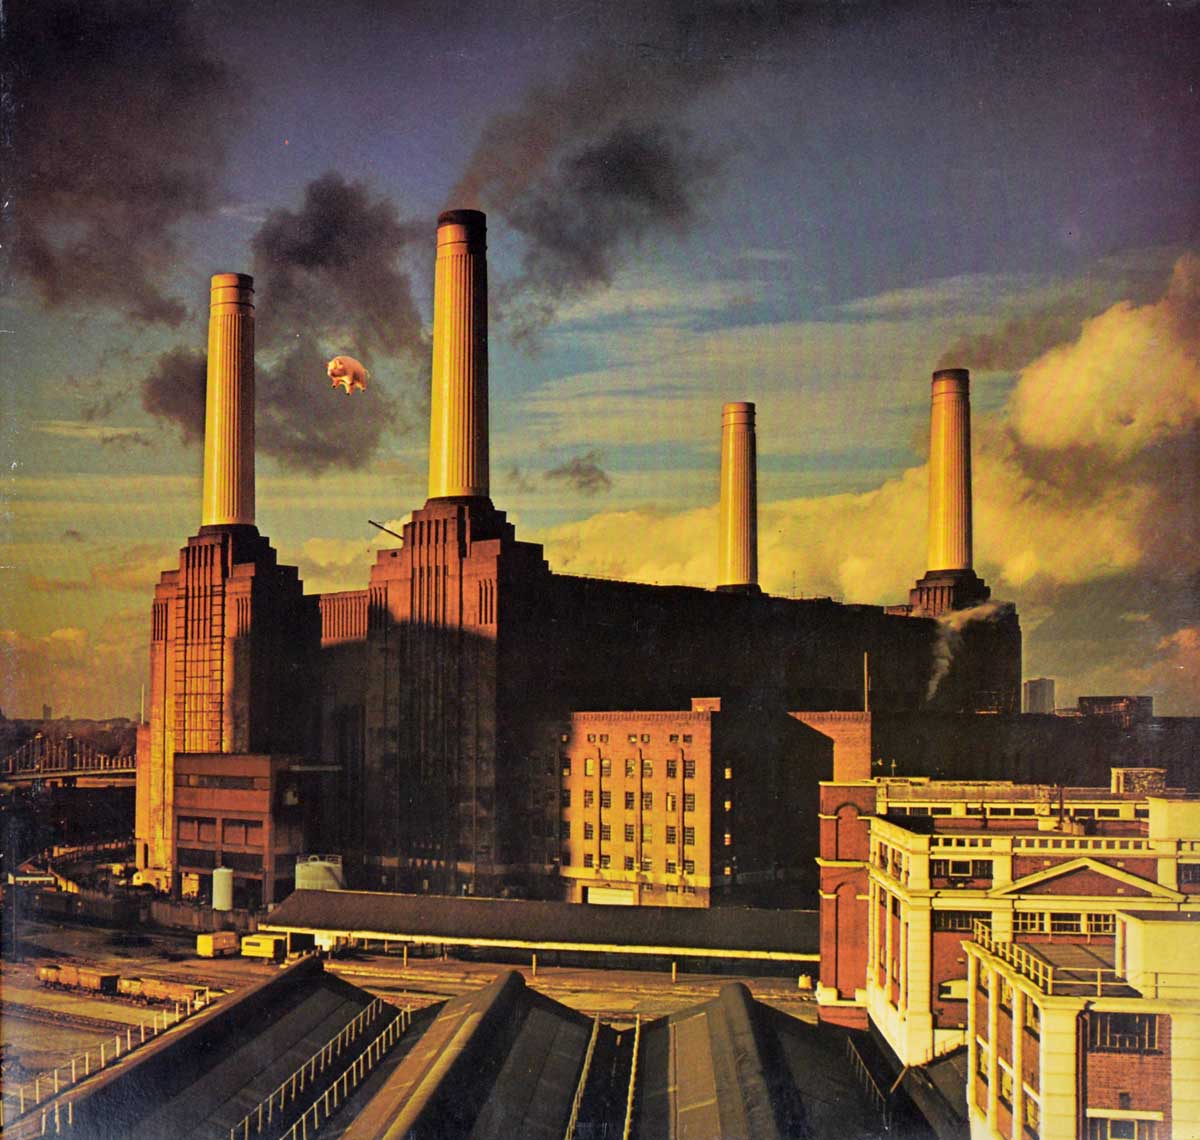 Album Front Cover Photo of "PINK FLOYD - Animals"